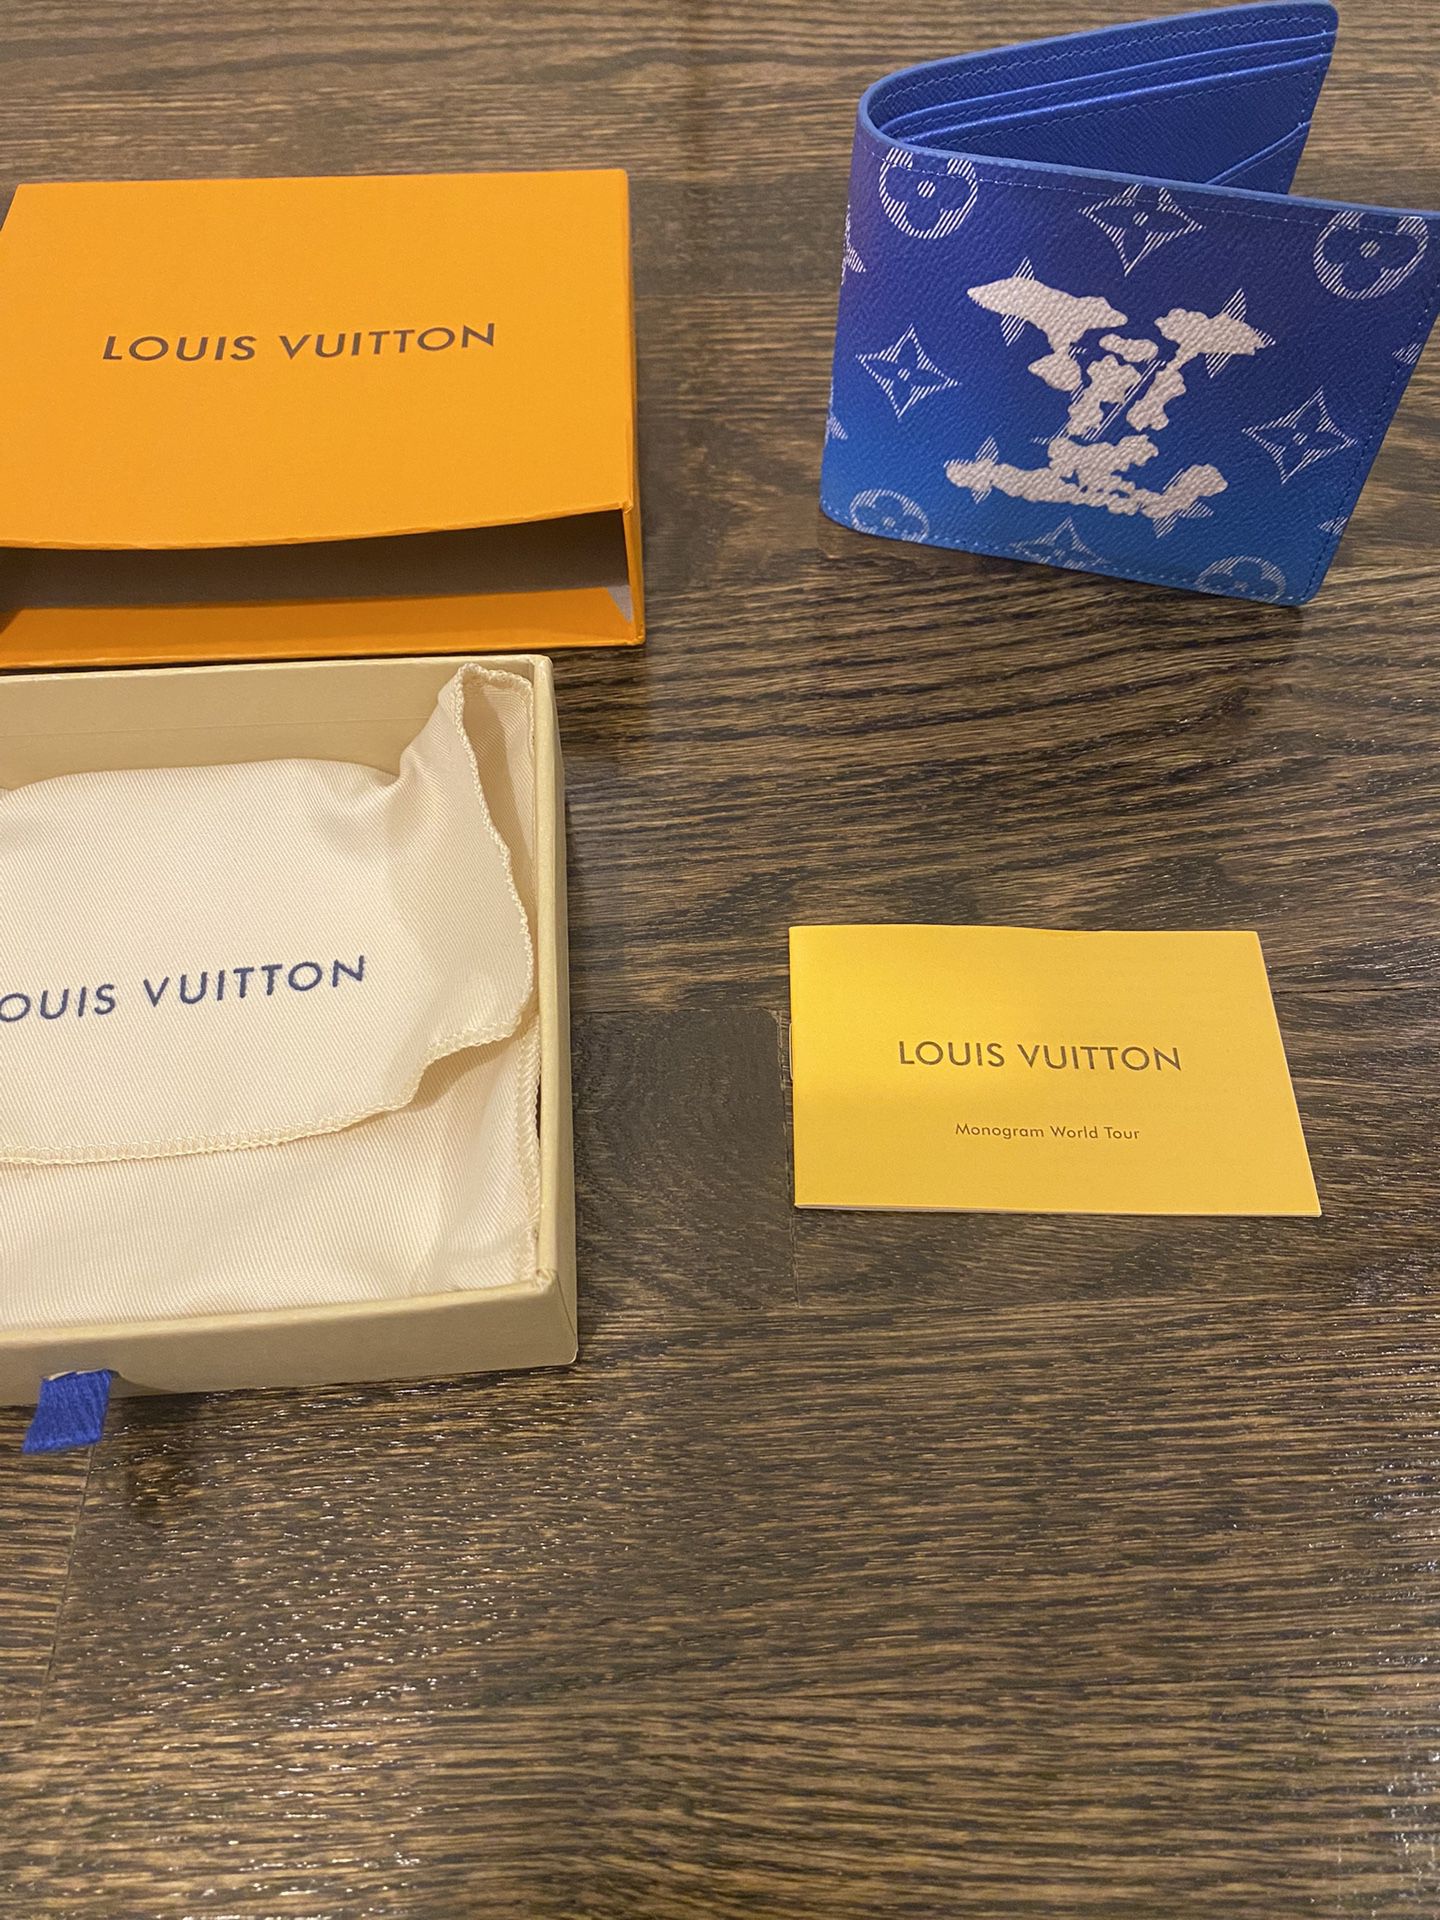 Louis Vuitton Long Origami Wallet for Sale in Calumet City, IL - OfferUp